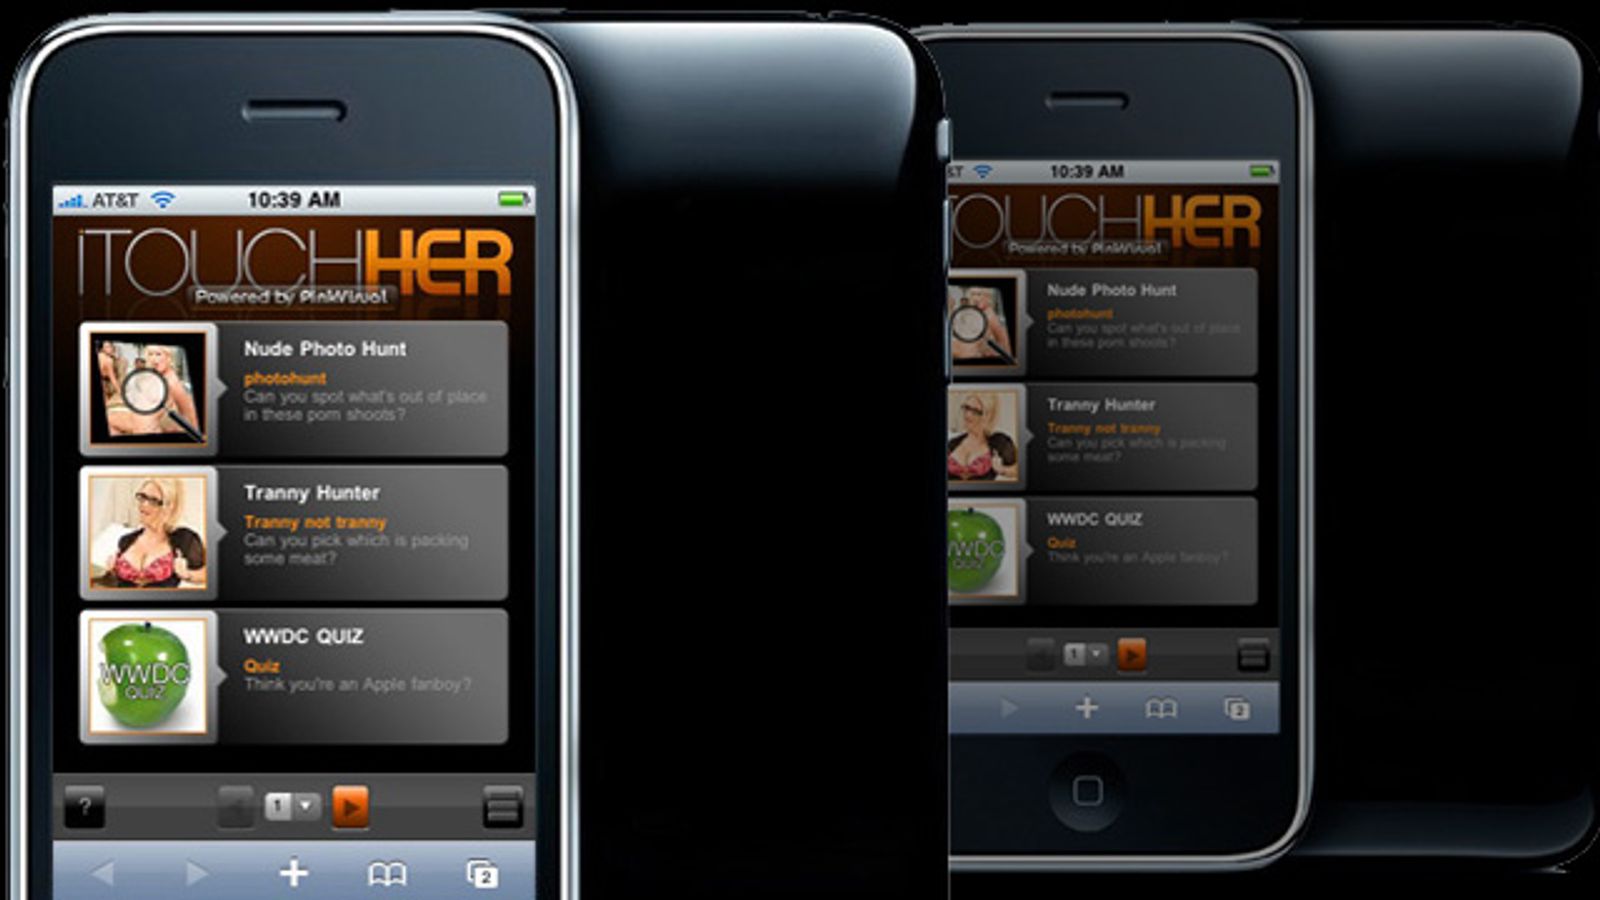 TopBucks Launches iTouchHer, New Adult ‘Web-App’ for the iPhone